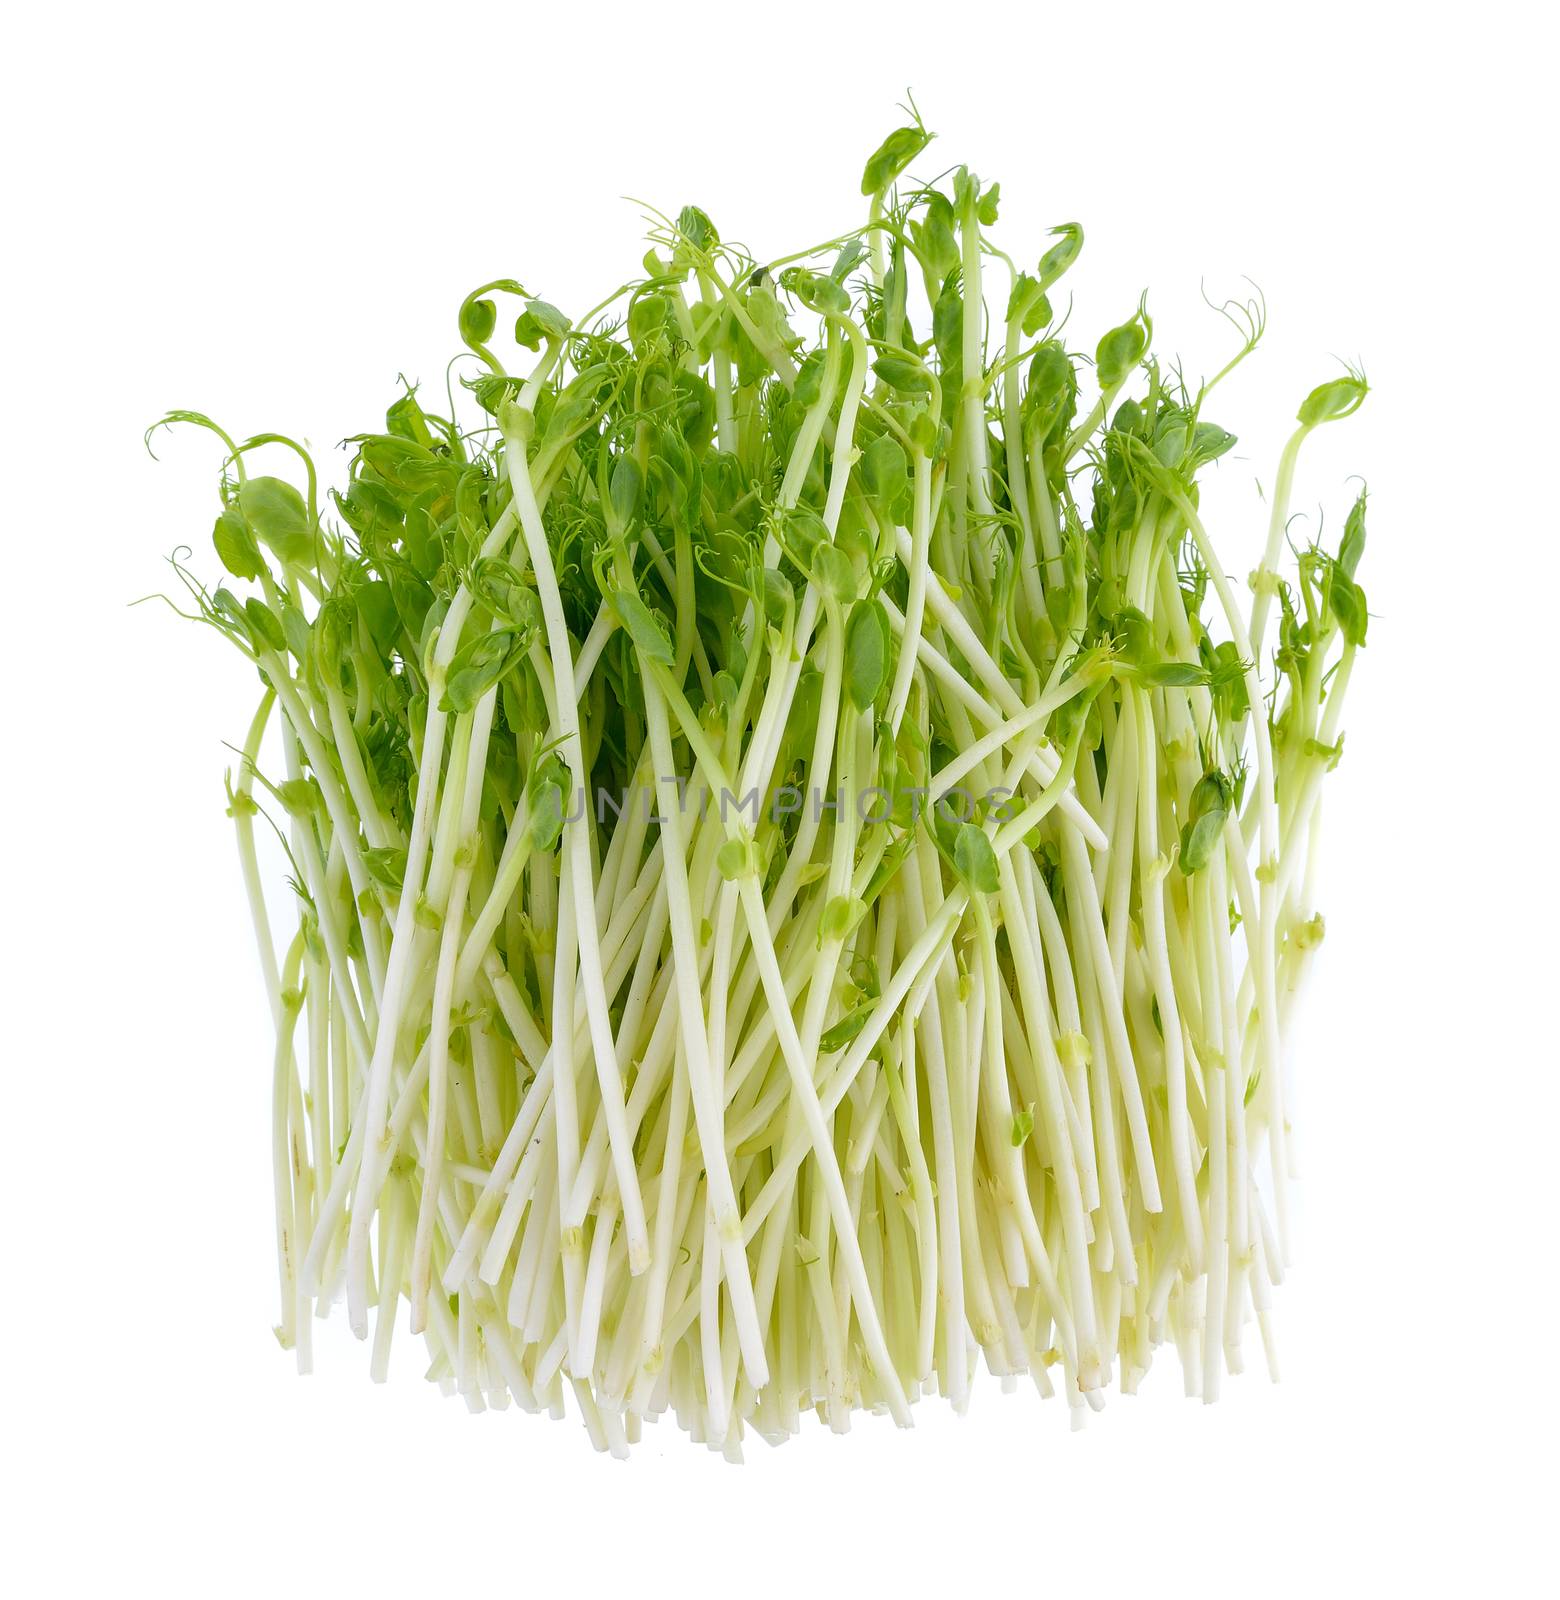  fresh green pea sprouts by sommai